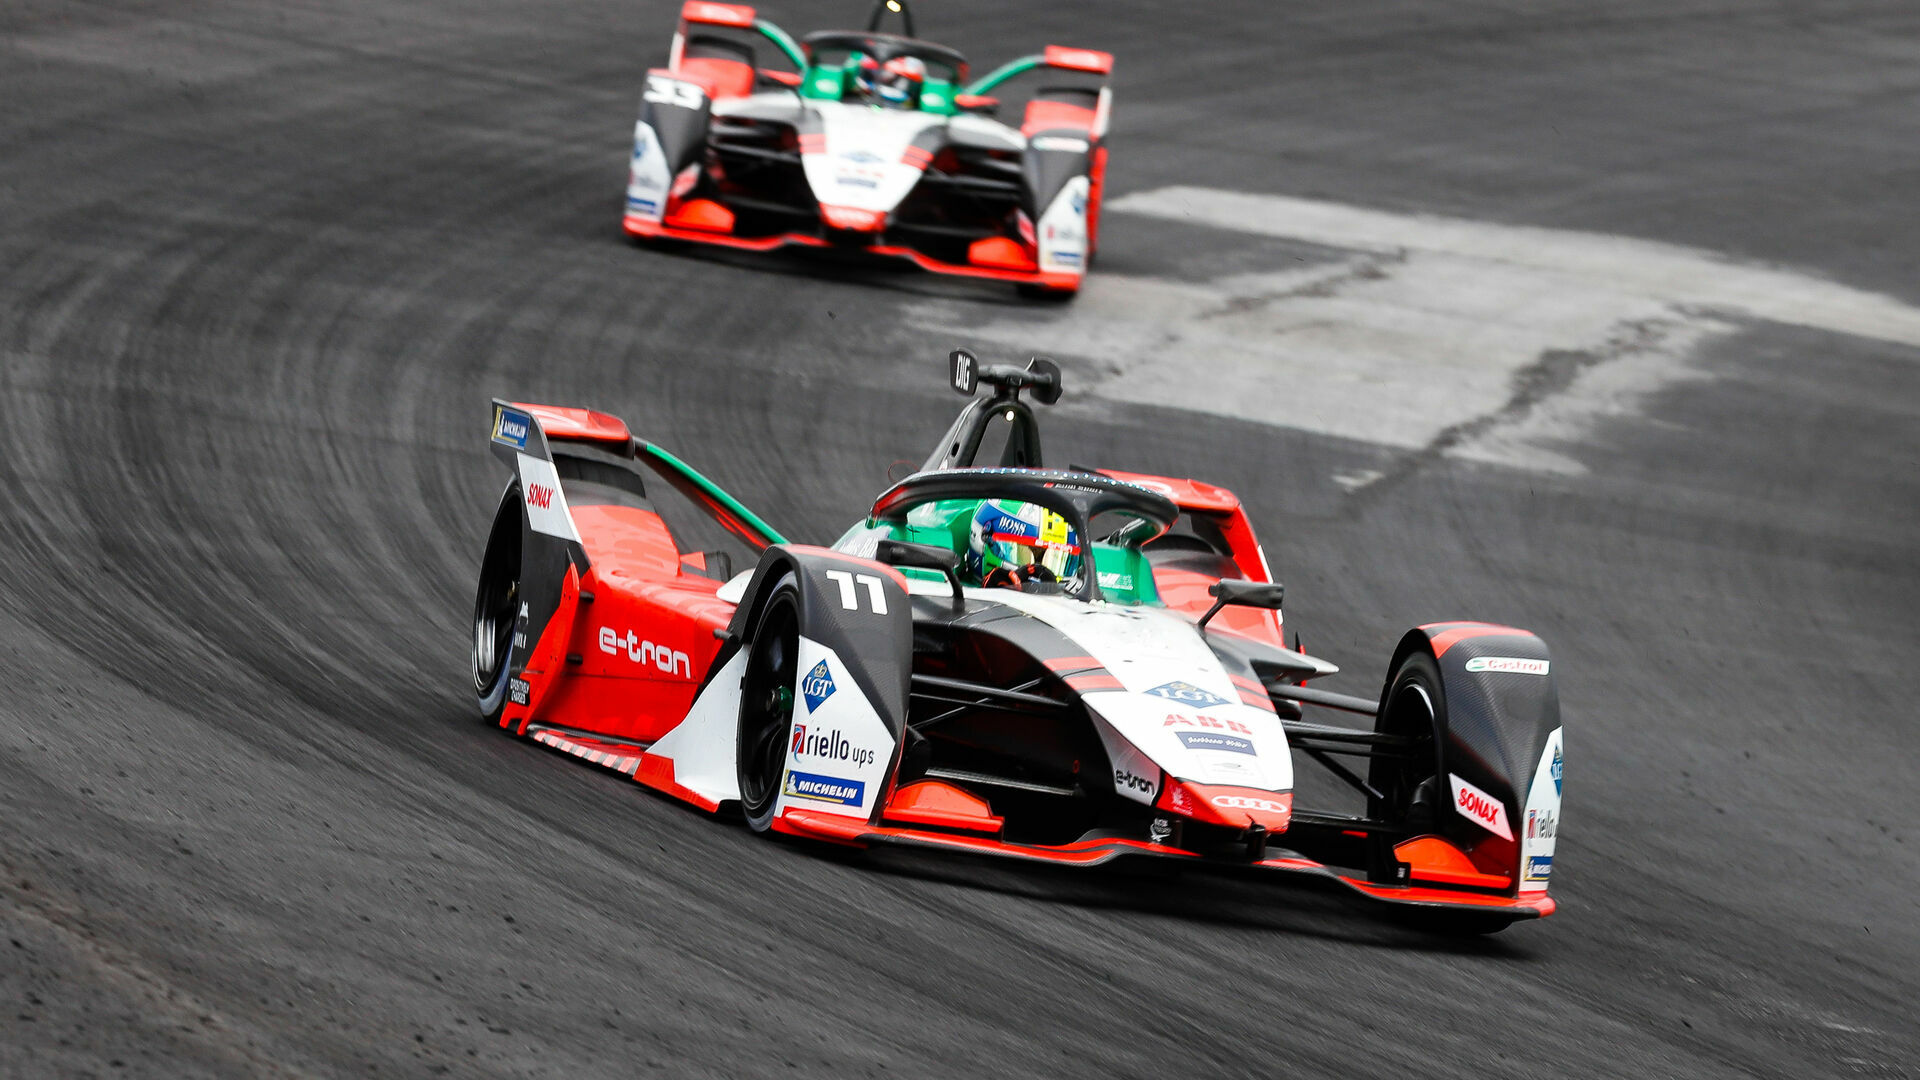 Formula E journey comes to an end for Audi